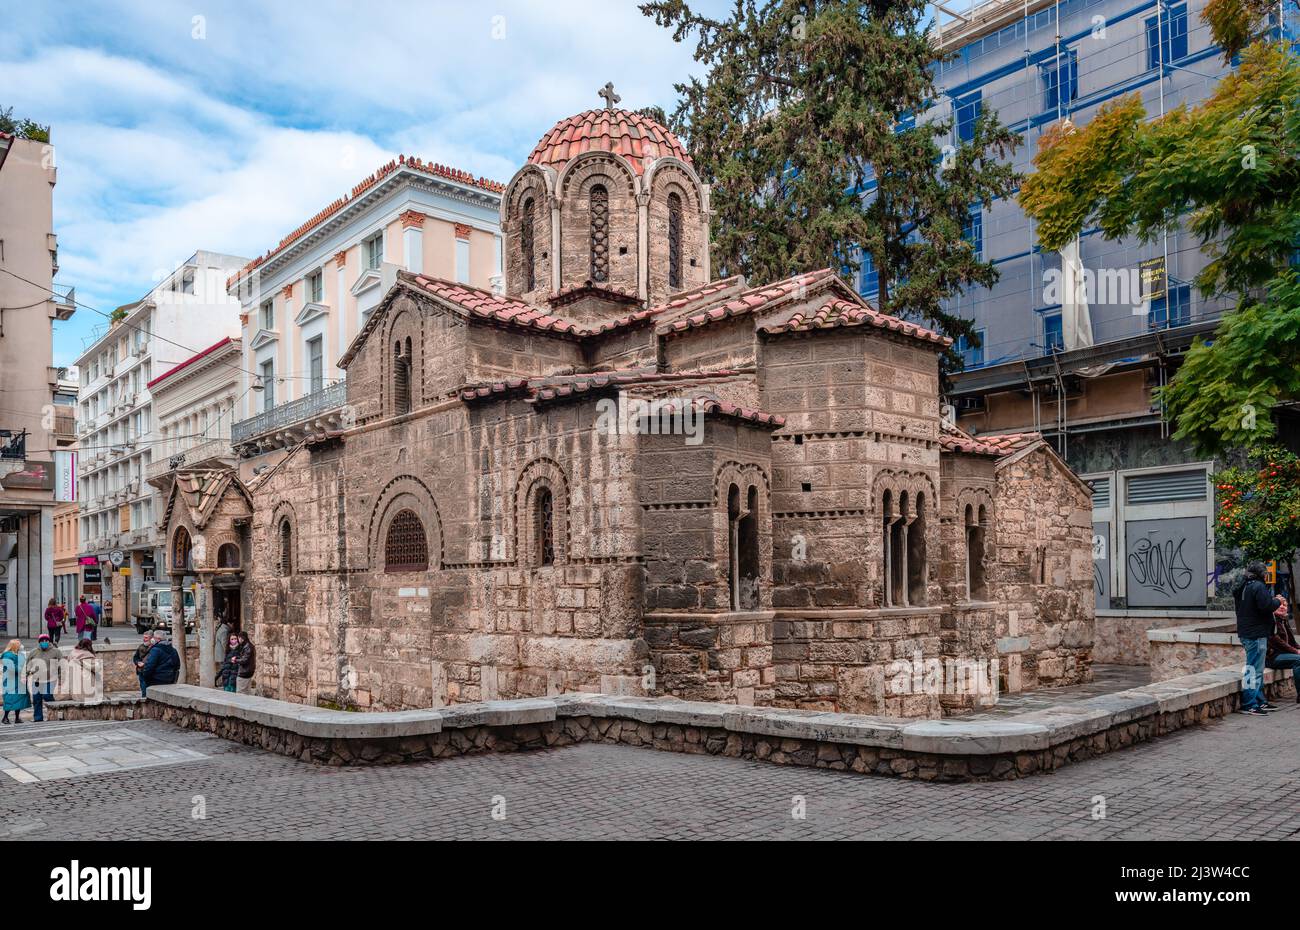 The Church of Panagia Kapnikarea, one of the oldest orthodox churches in Athens, located in the center of the modern city. Stock Photo